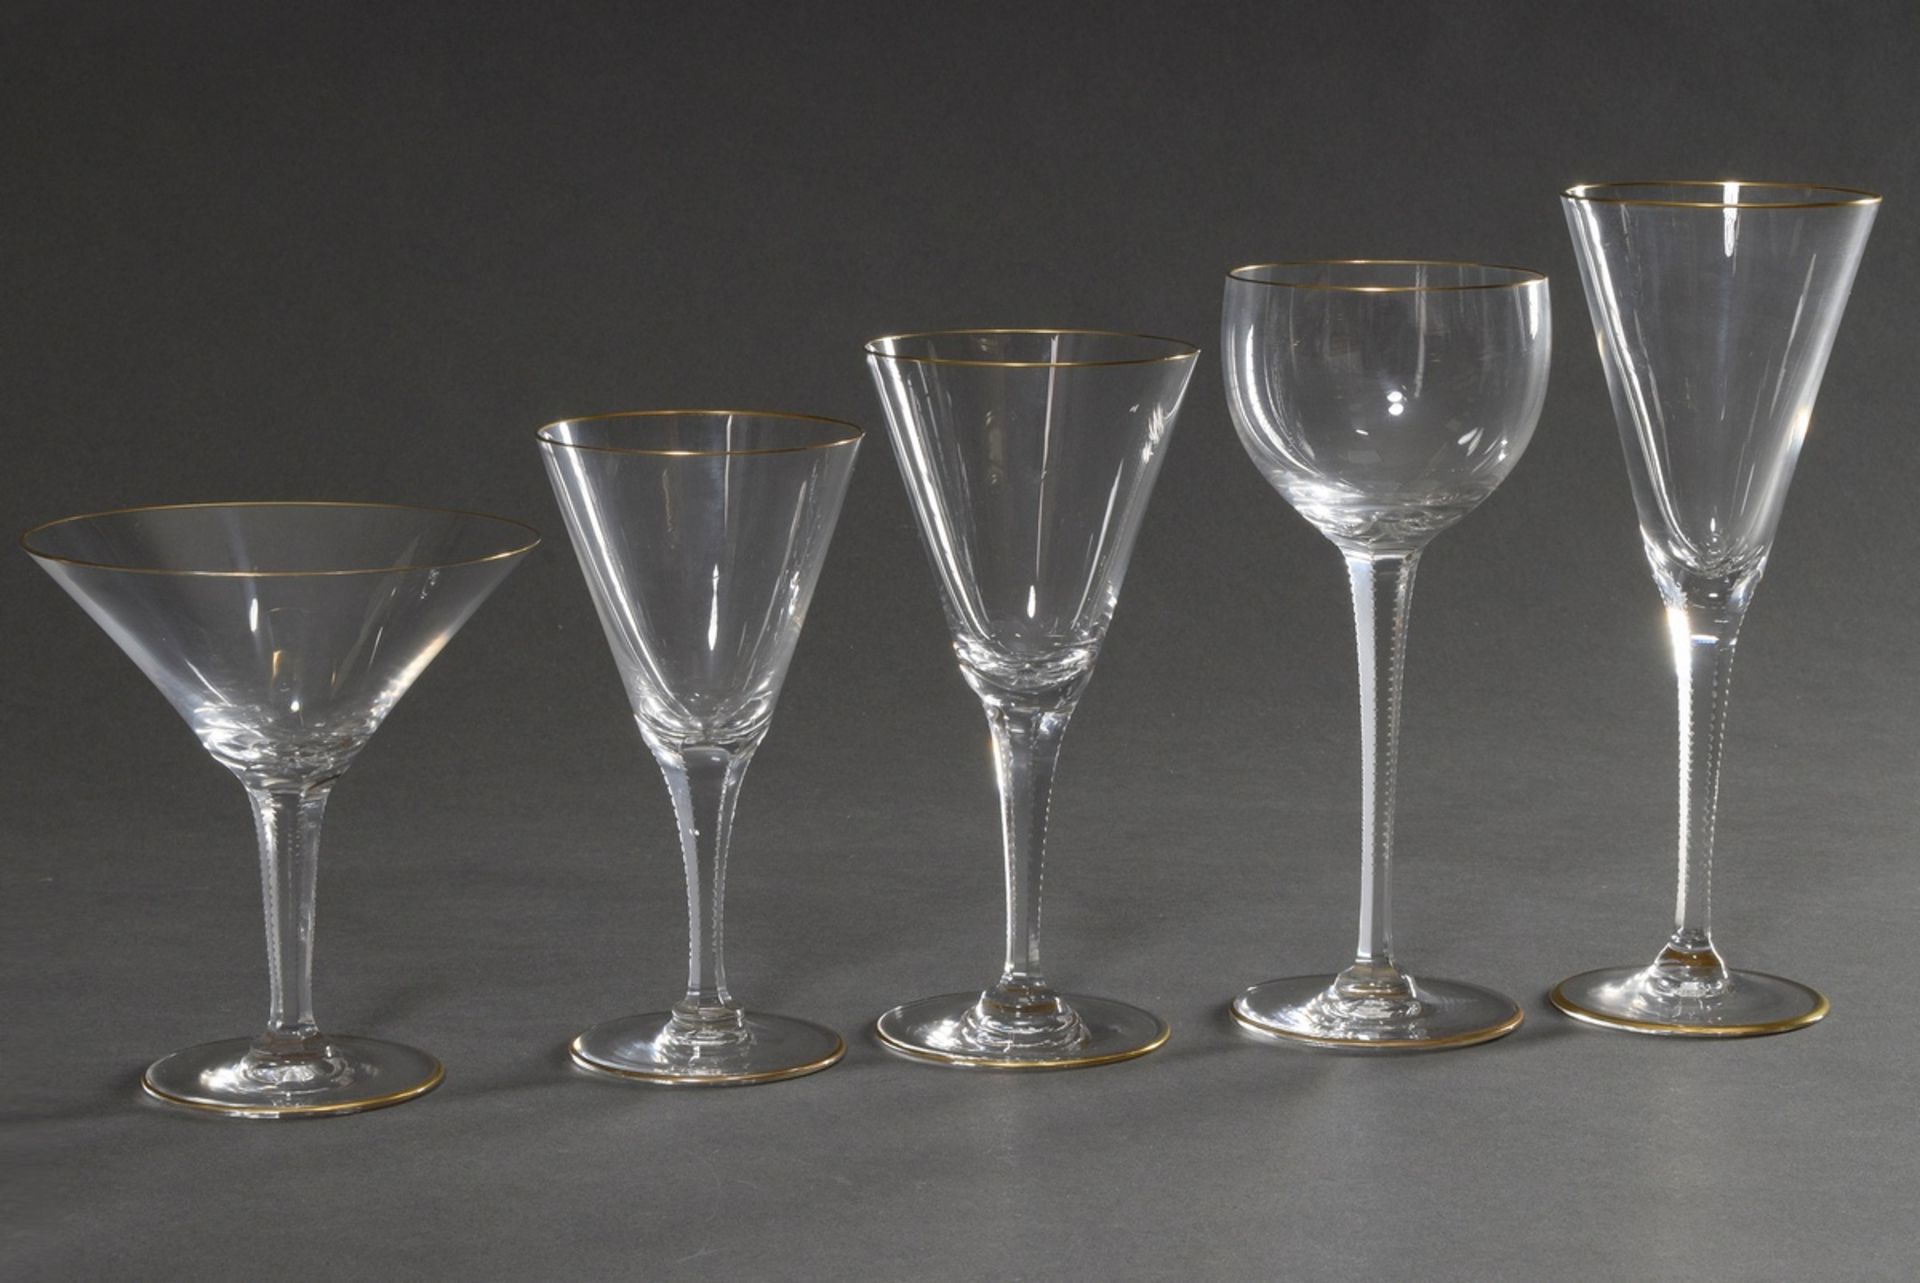 41 pieces drinking set with faceted stem, pointed goblet form, notched cut and delicate gold rim, c - Image 4 of 4